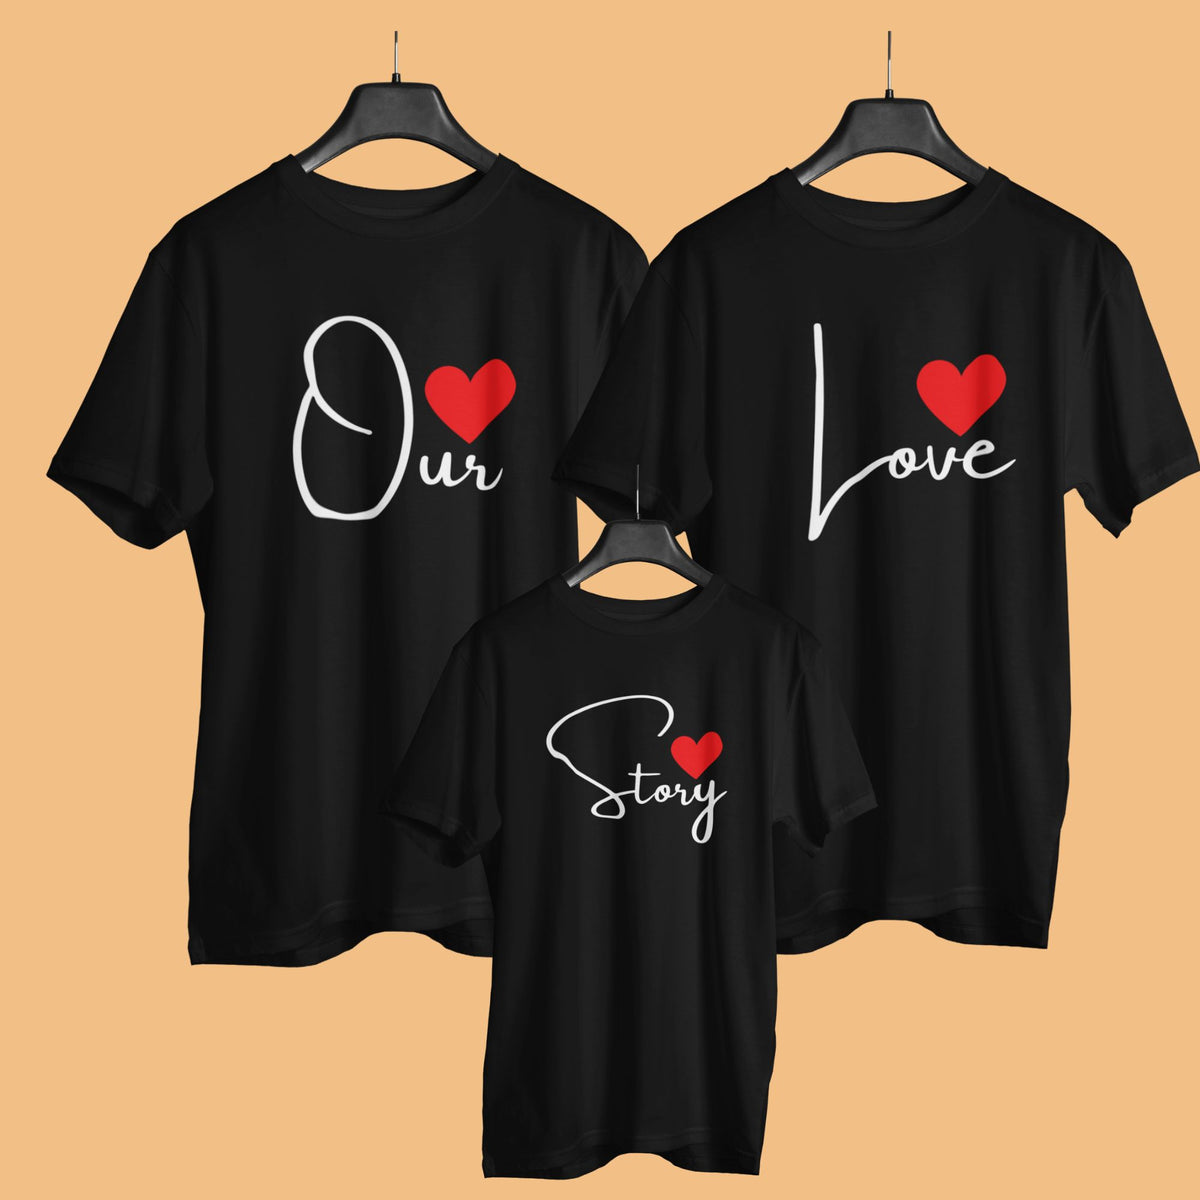 our-love-story-matching-family-black-t-shirts-for-mom-dad-son-daughter-gogirgit-hanger